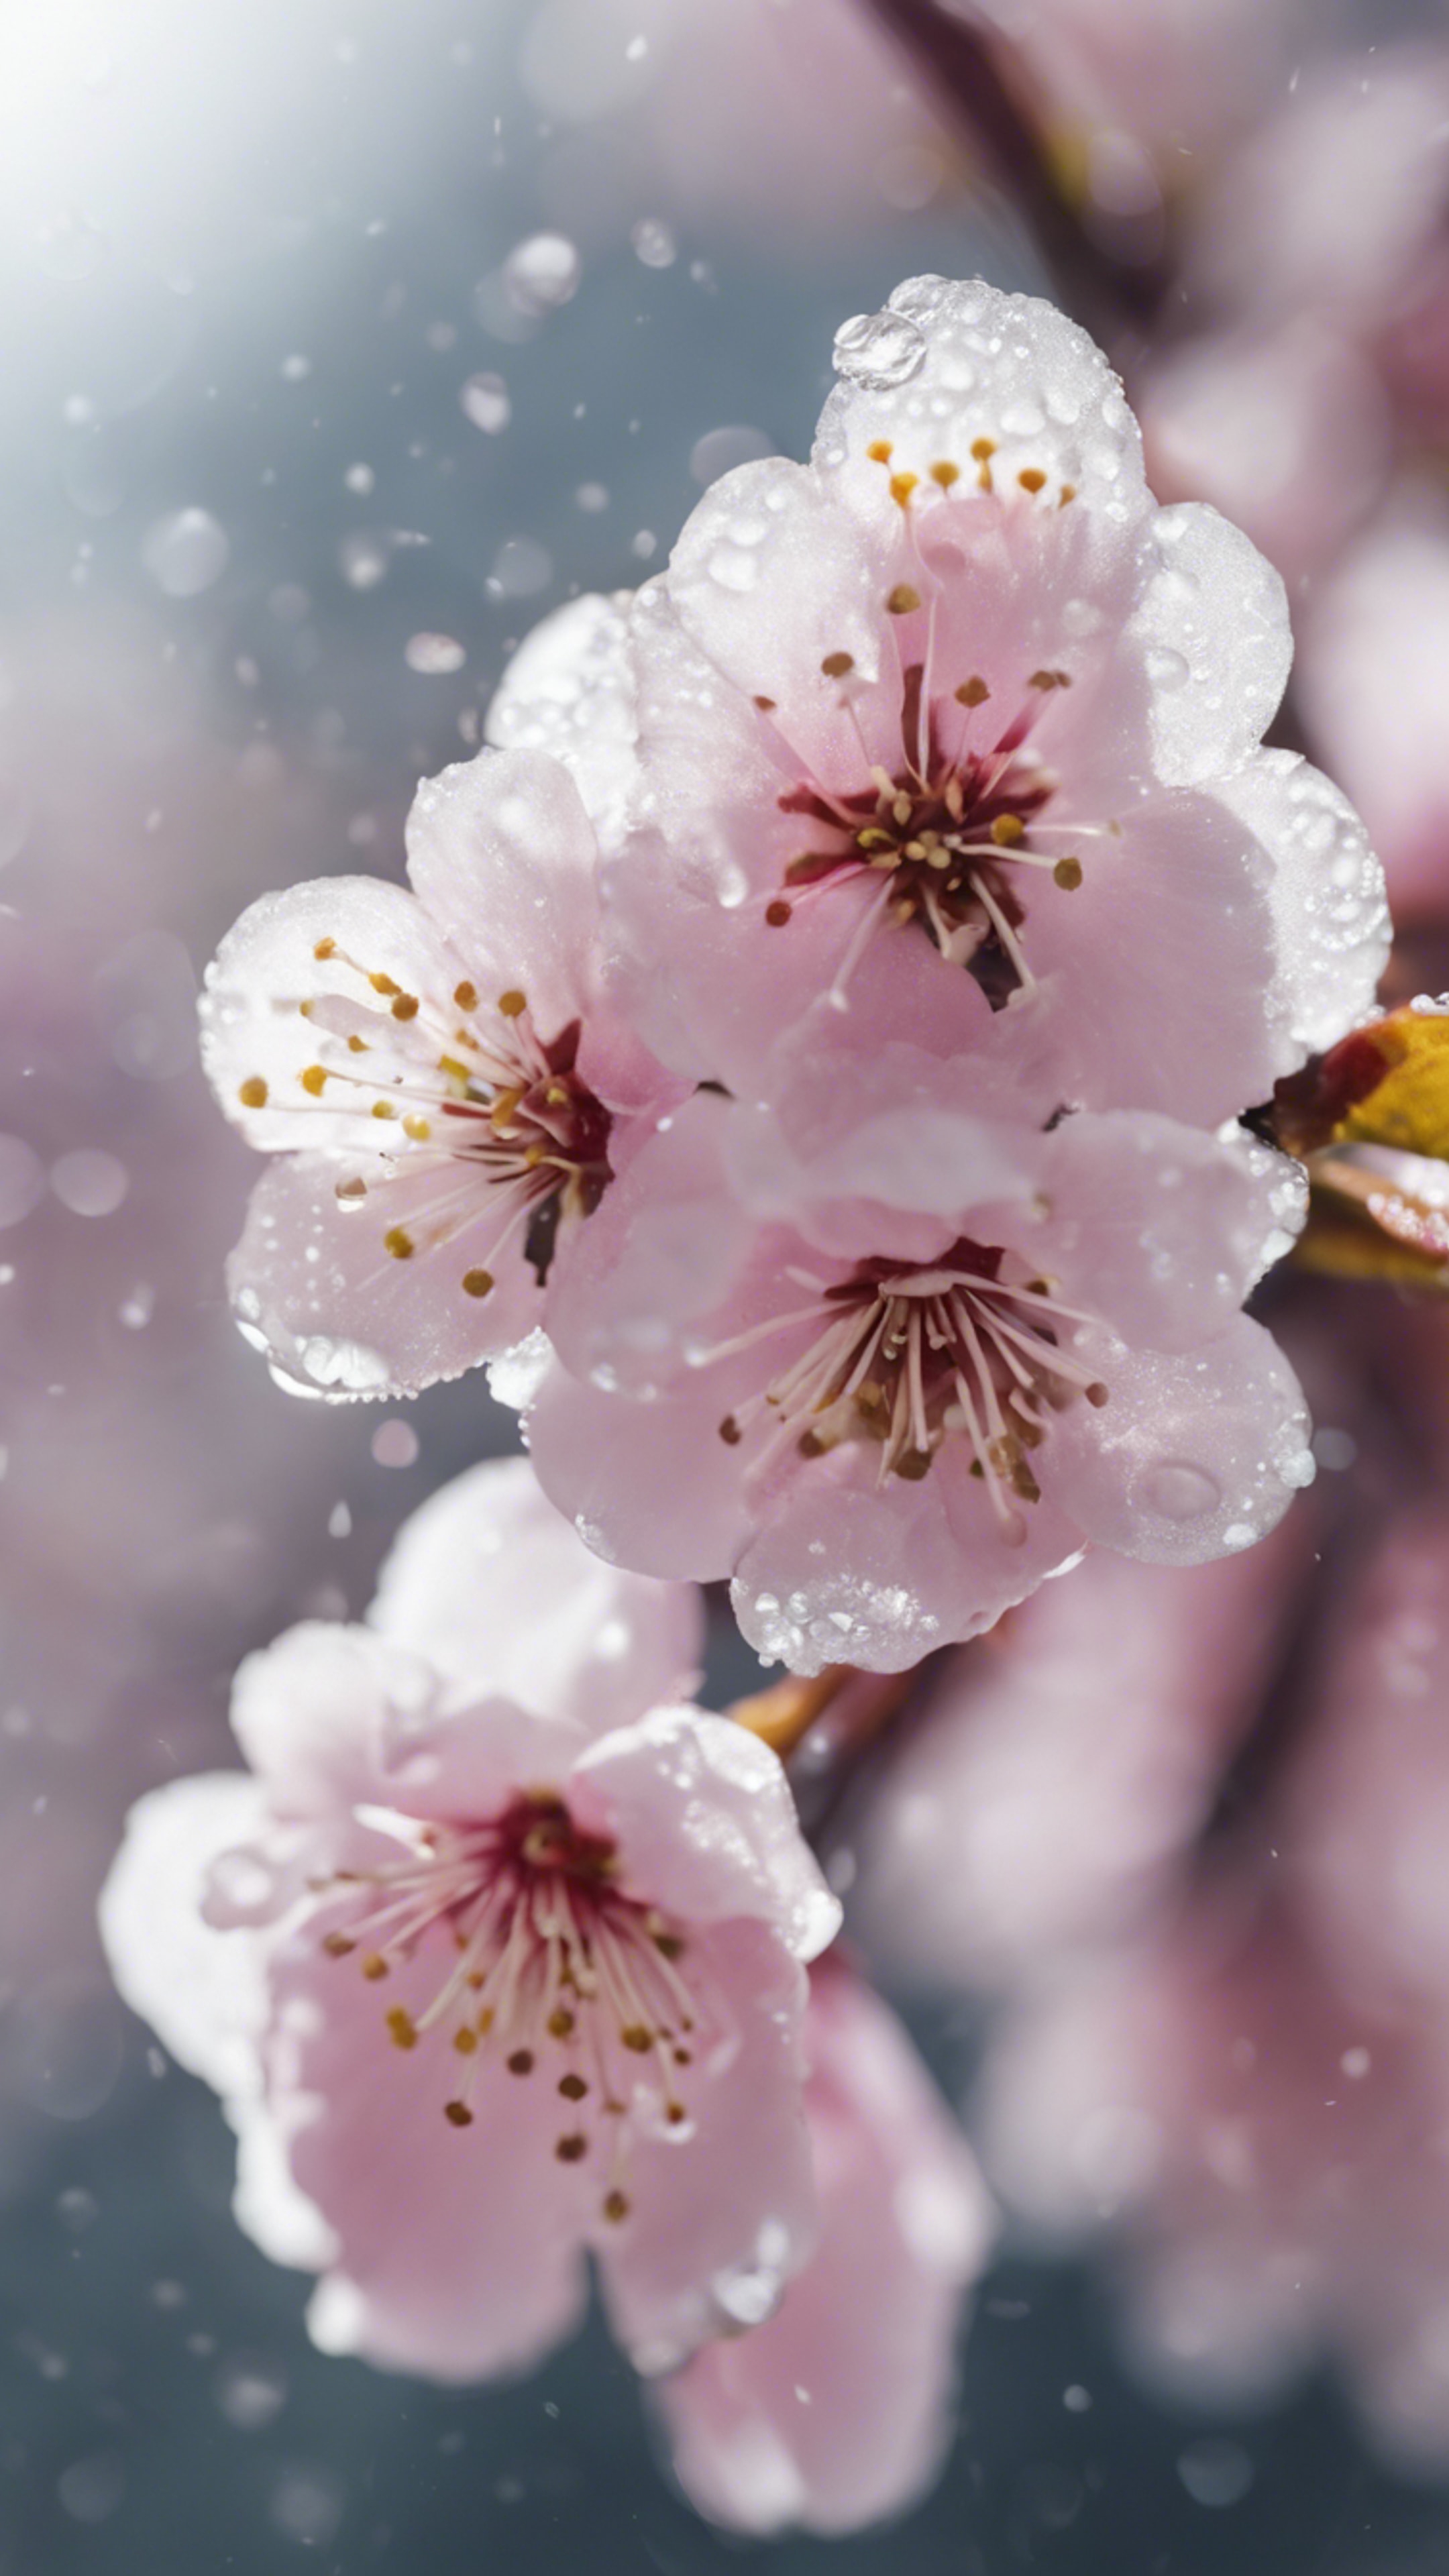 A closeup image of a freshly blooming cherry blossom, speckled with dew drops. Обои[d7e9cc65cc424f509aa2]